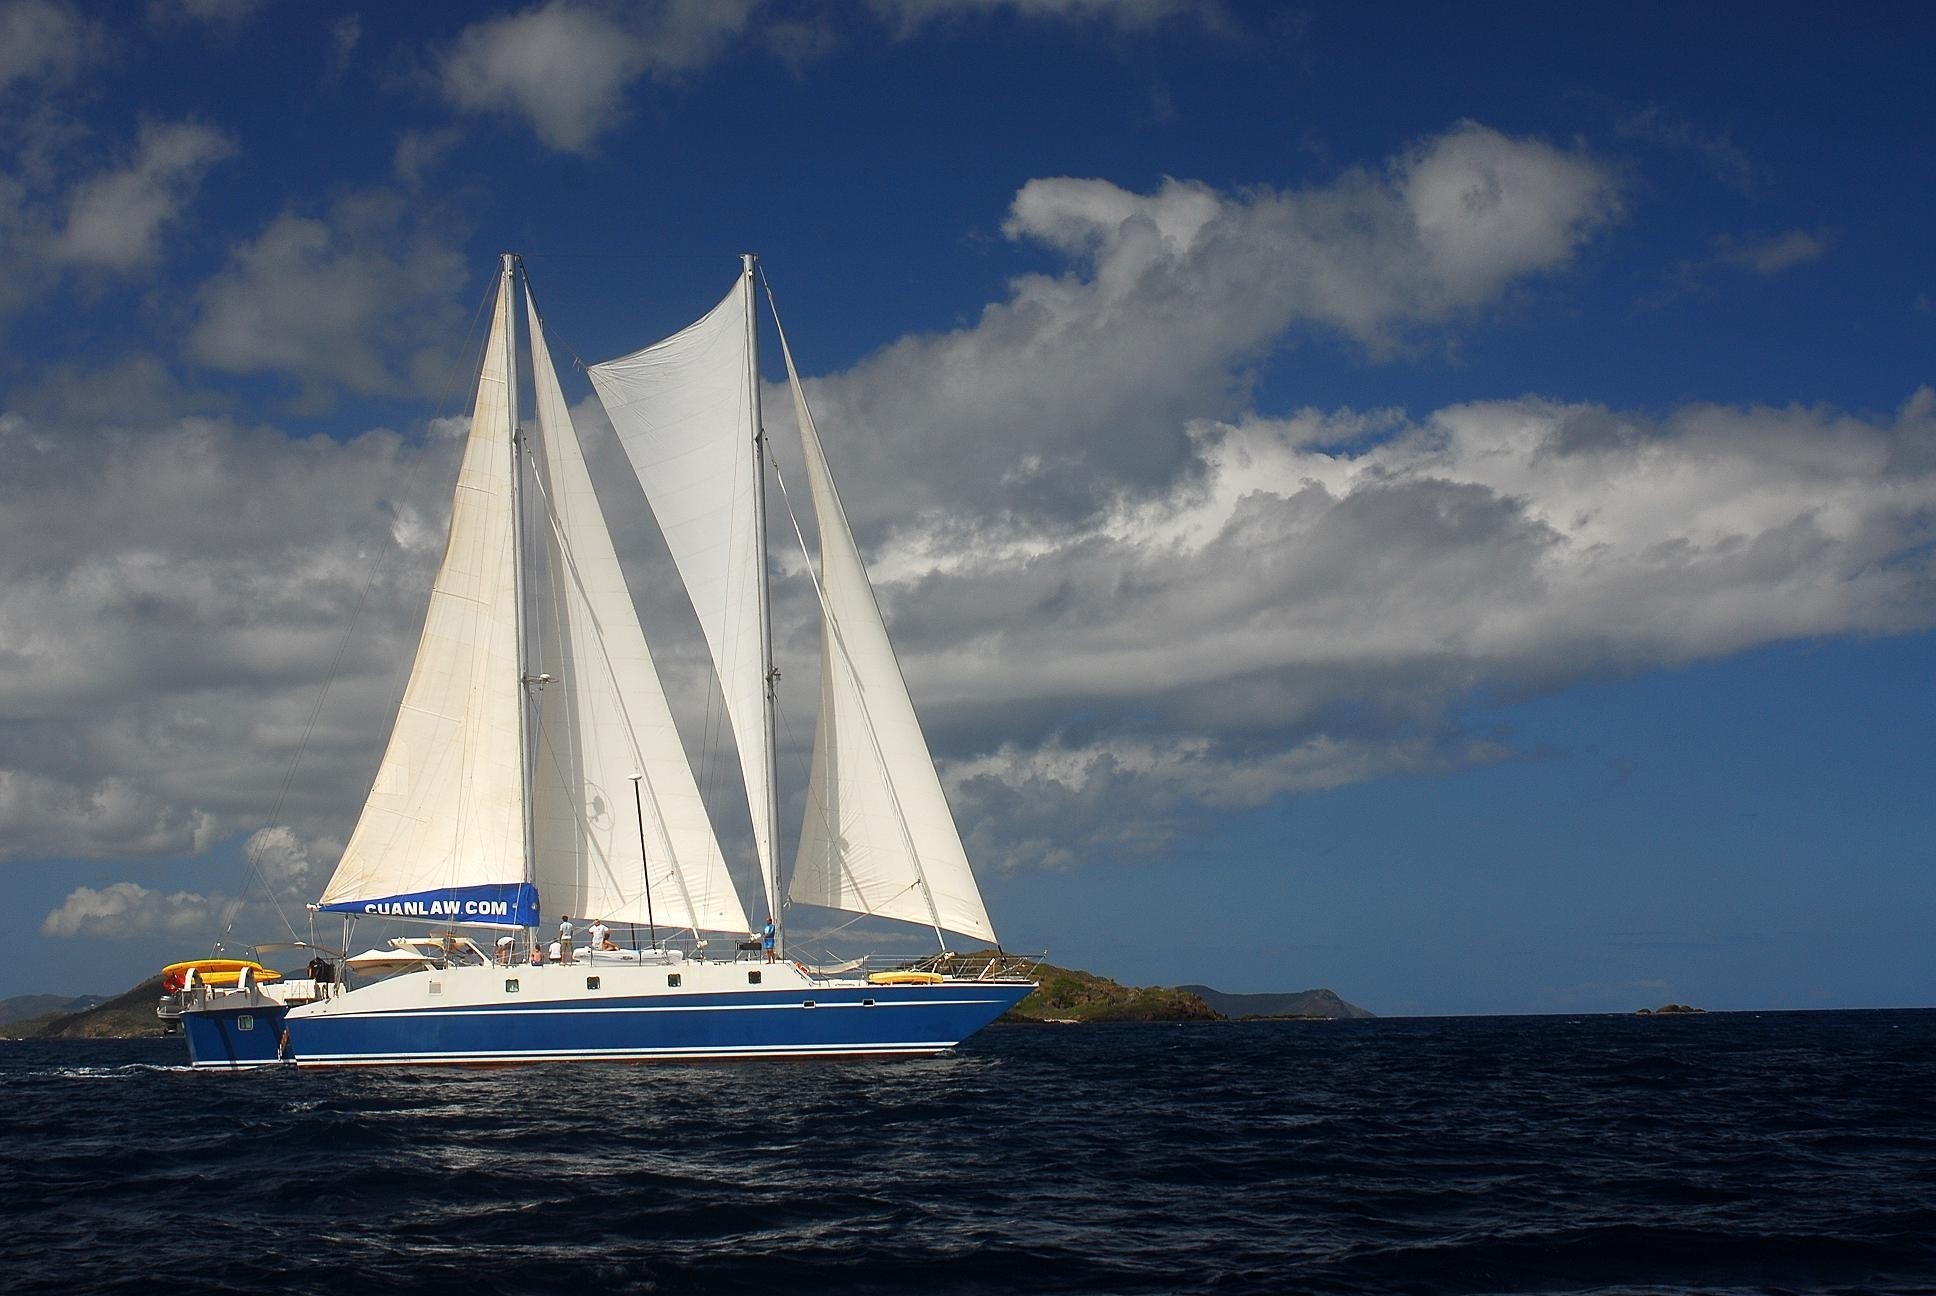 The 32m Yacht CUAN LAW